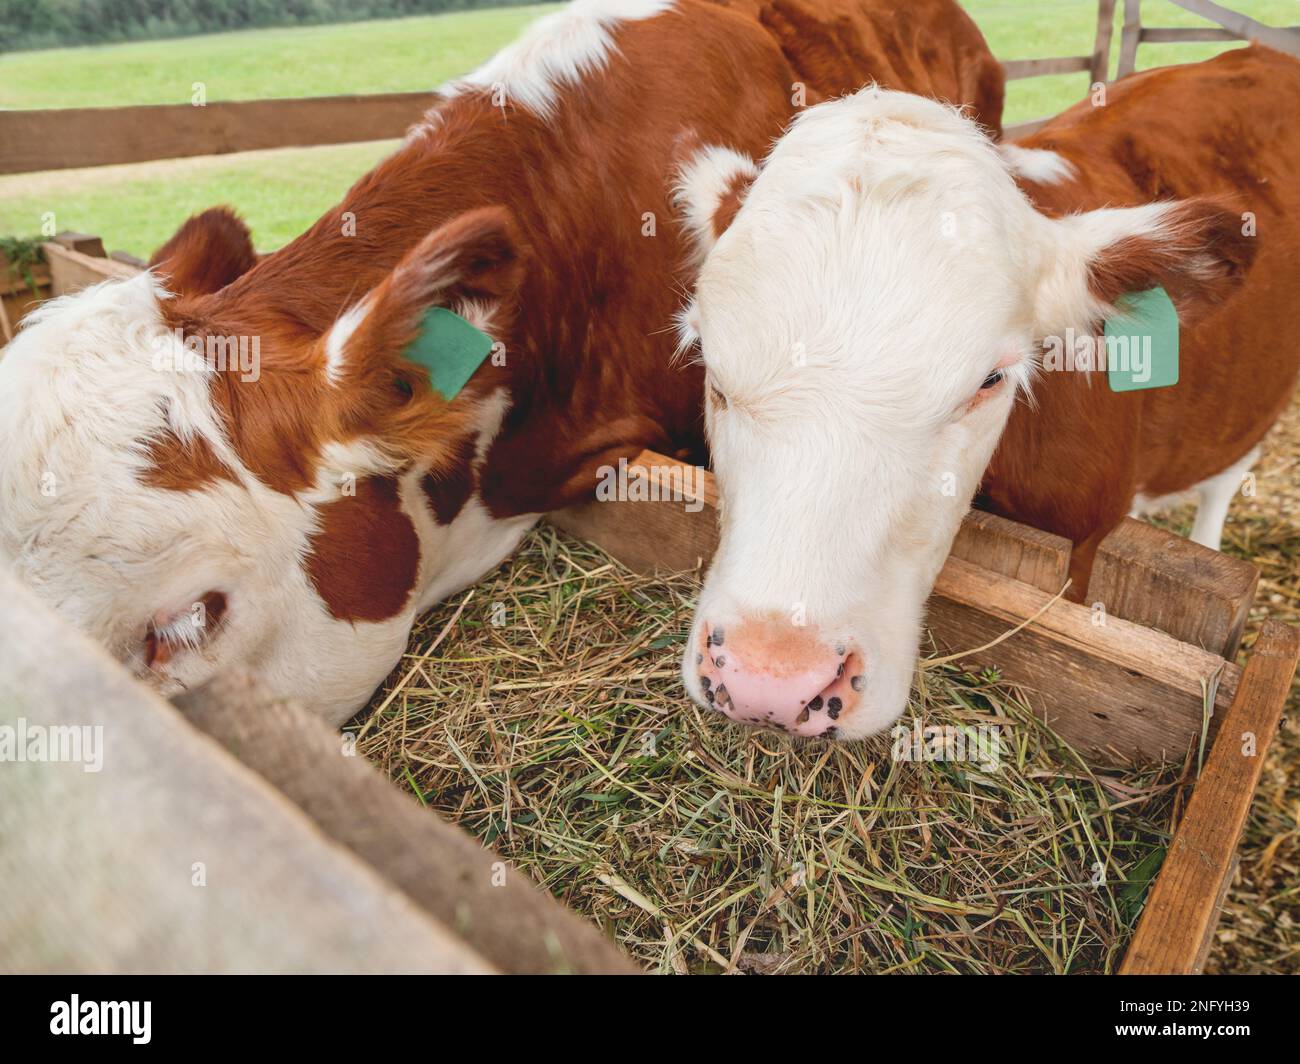 Two calves are eating hay. Specially prepared hay for cattle. Farm cows with tags on their ears. Stock Photo